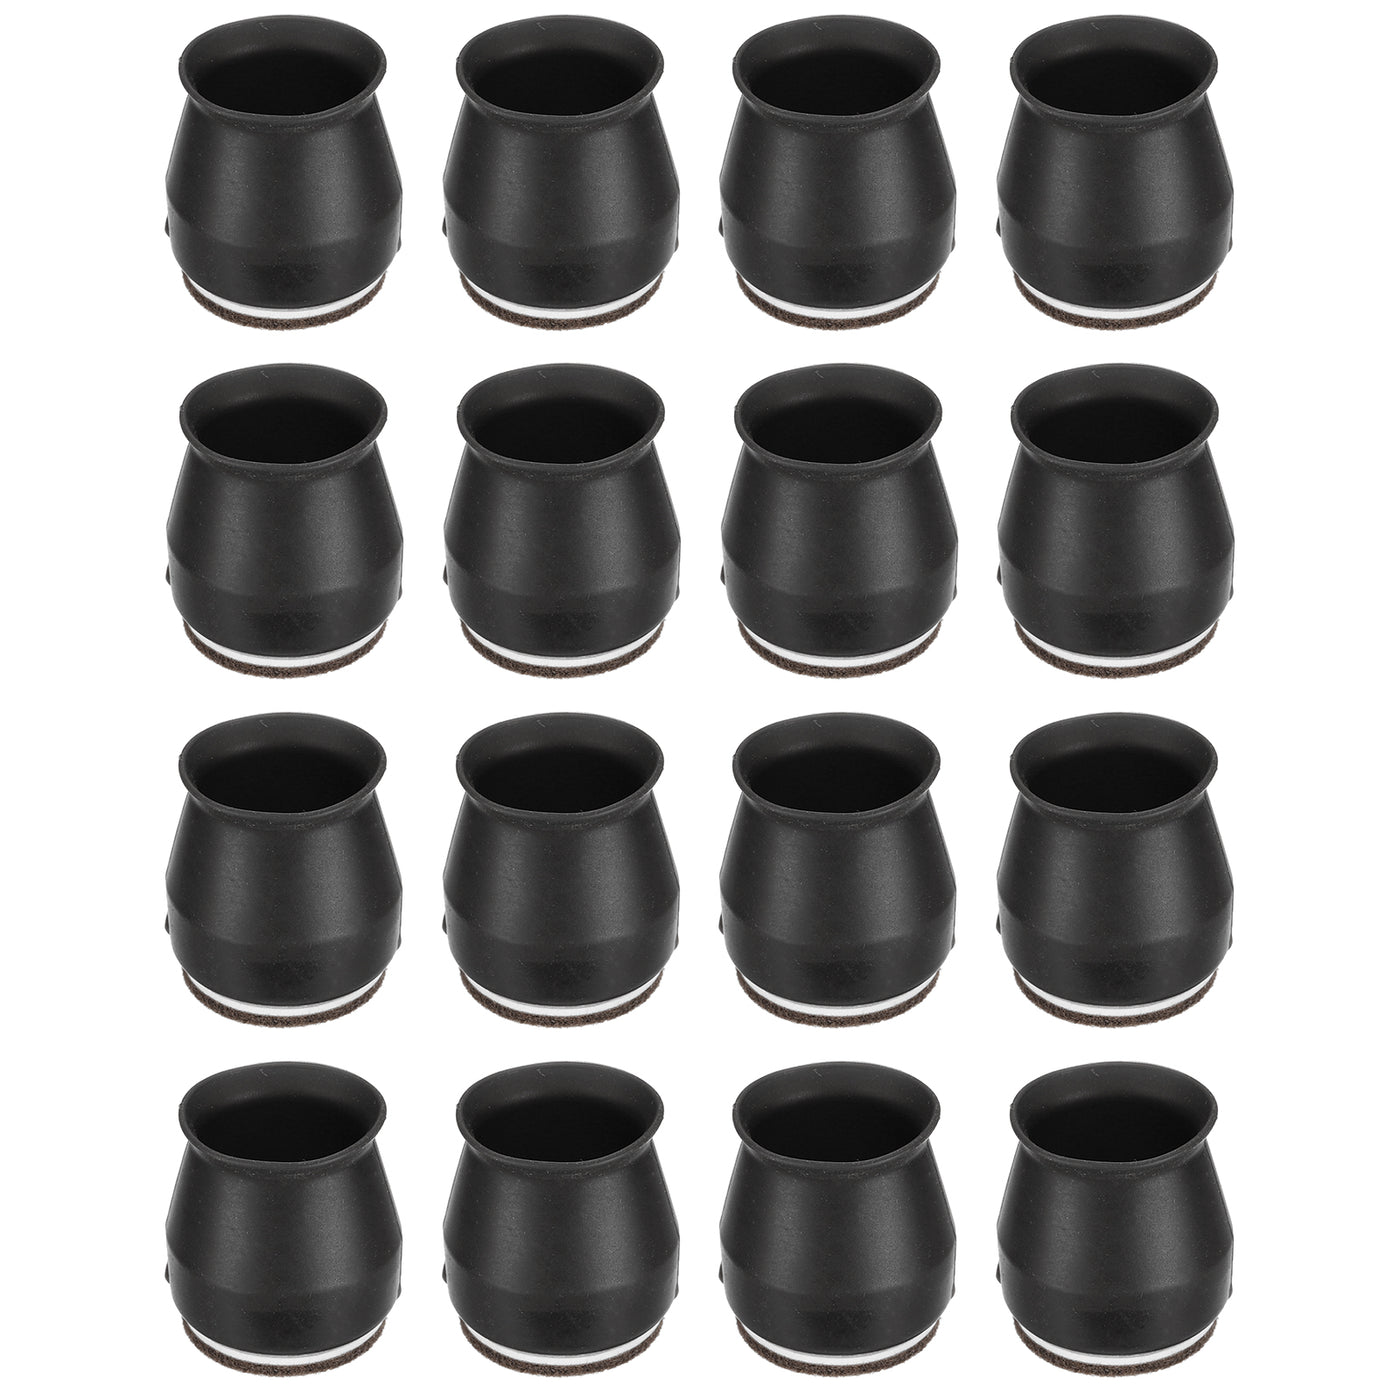 uxcell Uxcell Chair Leg Floor Protectors, 16Pcs 28mm/ 1.1" Silicone & Felt Chair Leg Cover Caps for Hardwood Floors (Black)